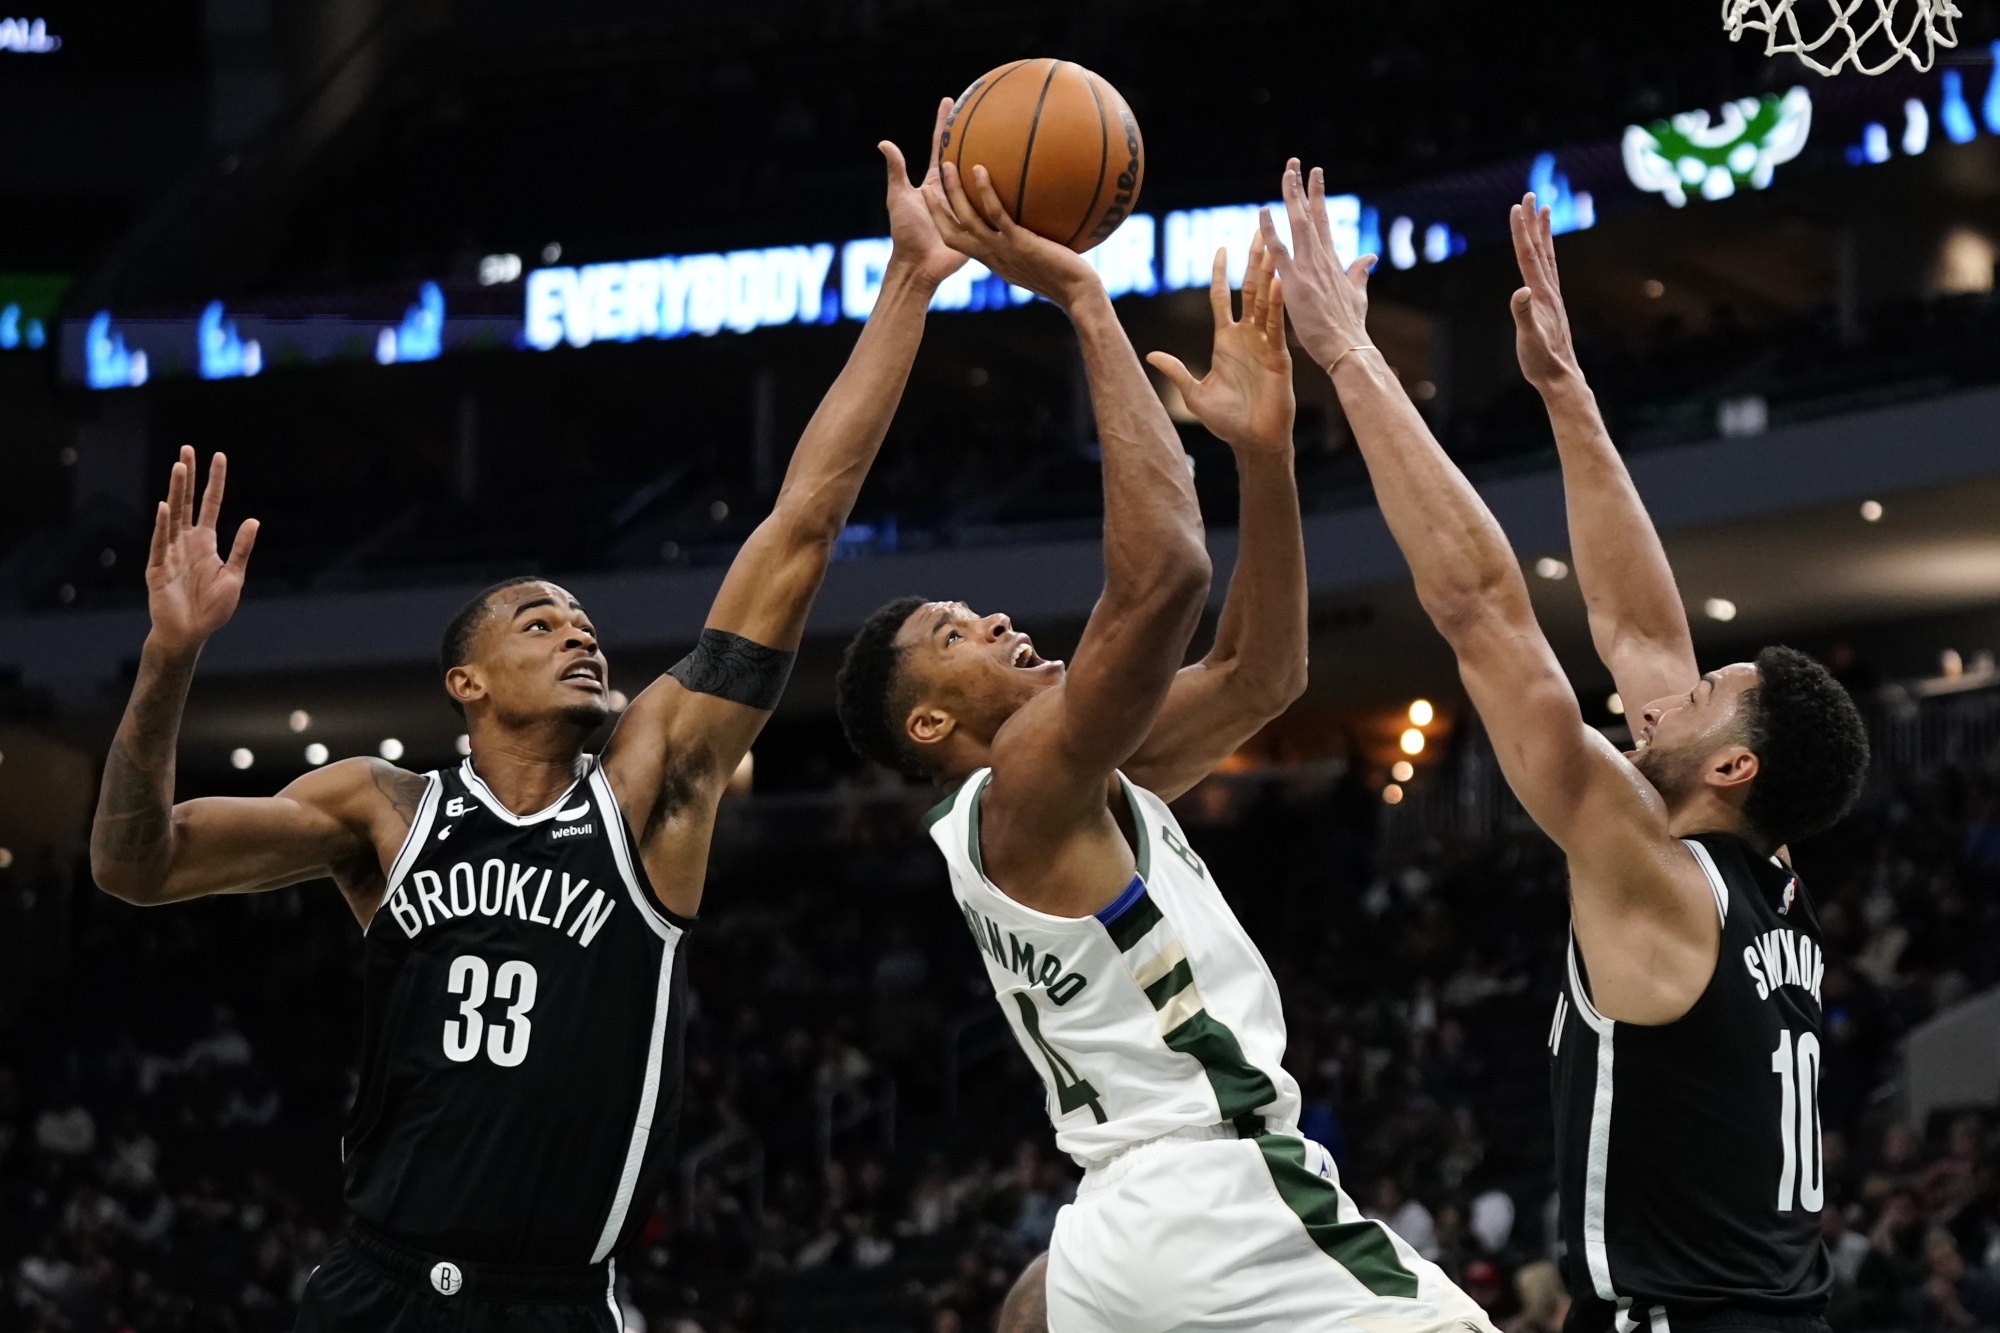 Nets' Nic Claxton showing growth in game during Brooklyn win